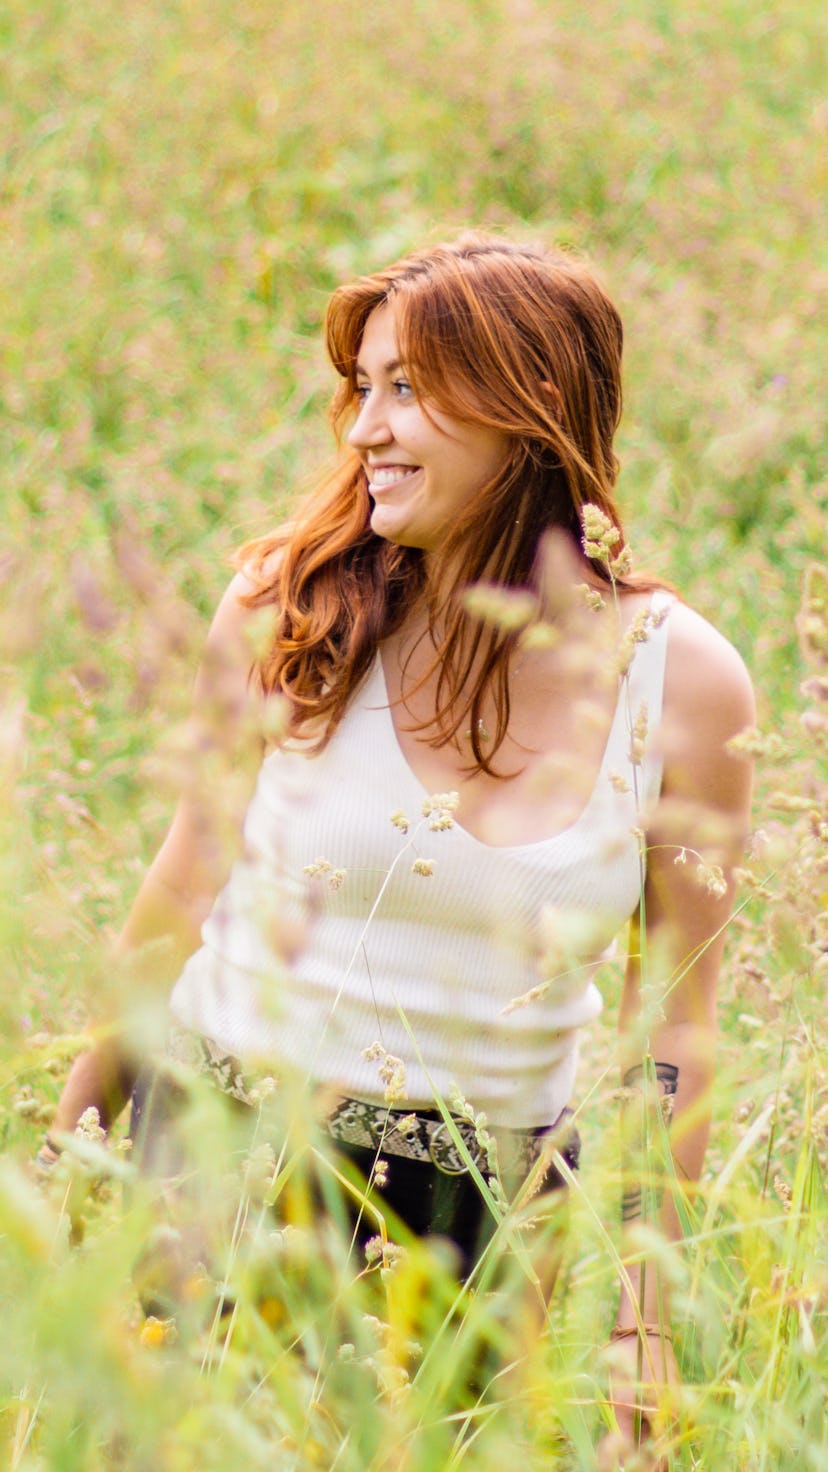 Woman in a field smiling and looking out. Aries, Taurus, Cancer, Leo, Virgo, and Capricorn zodiac si...